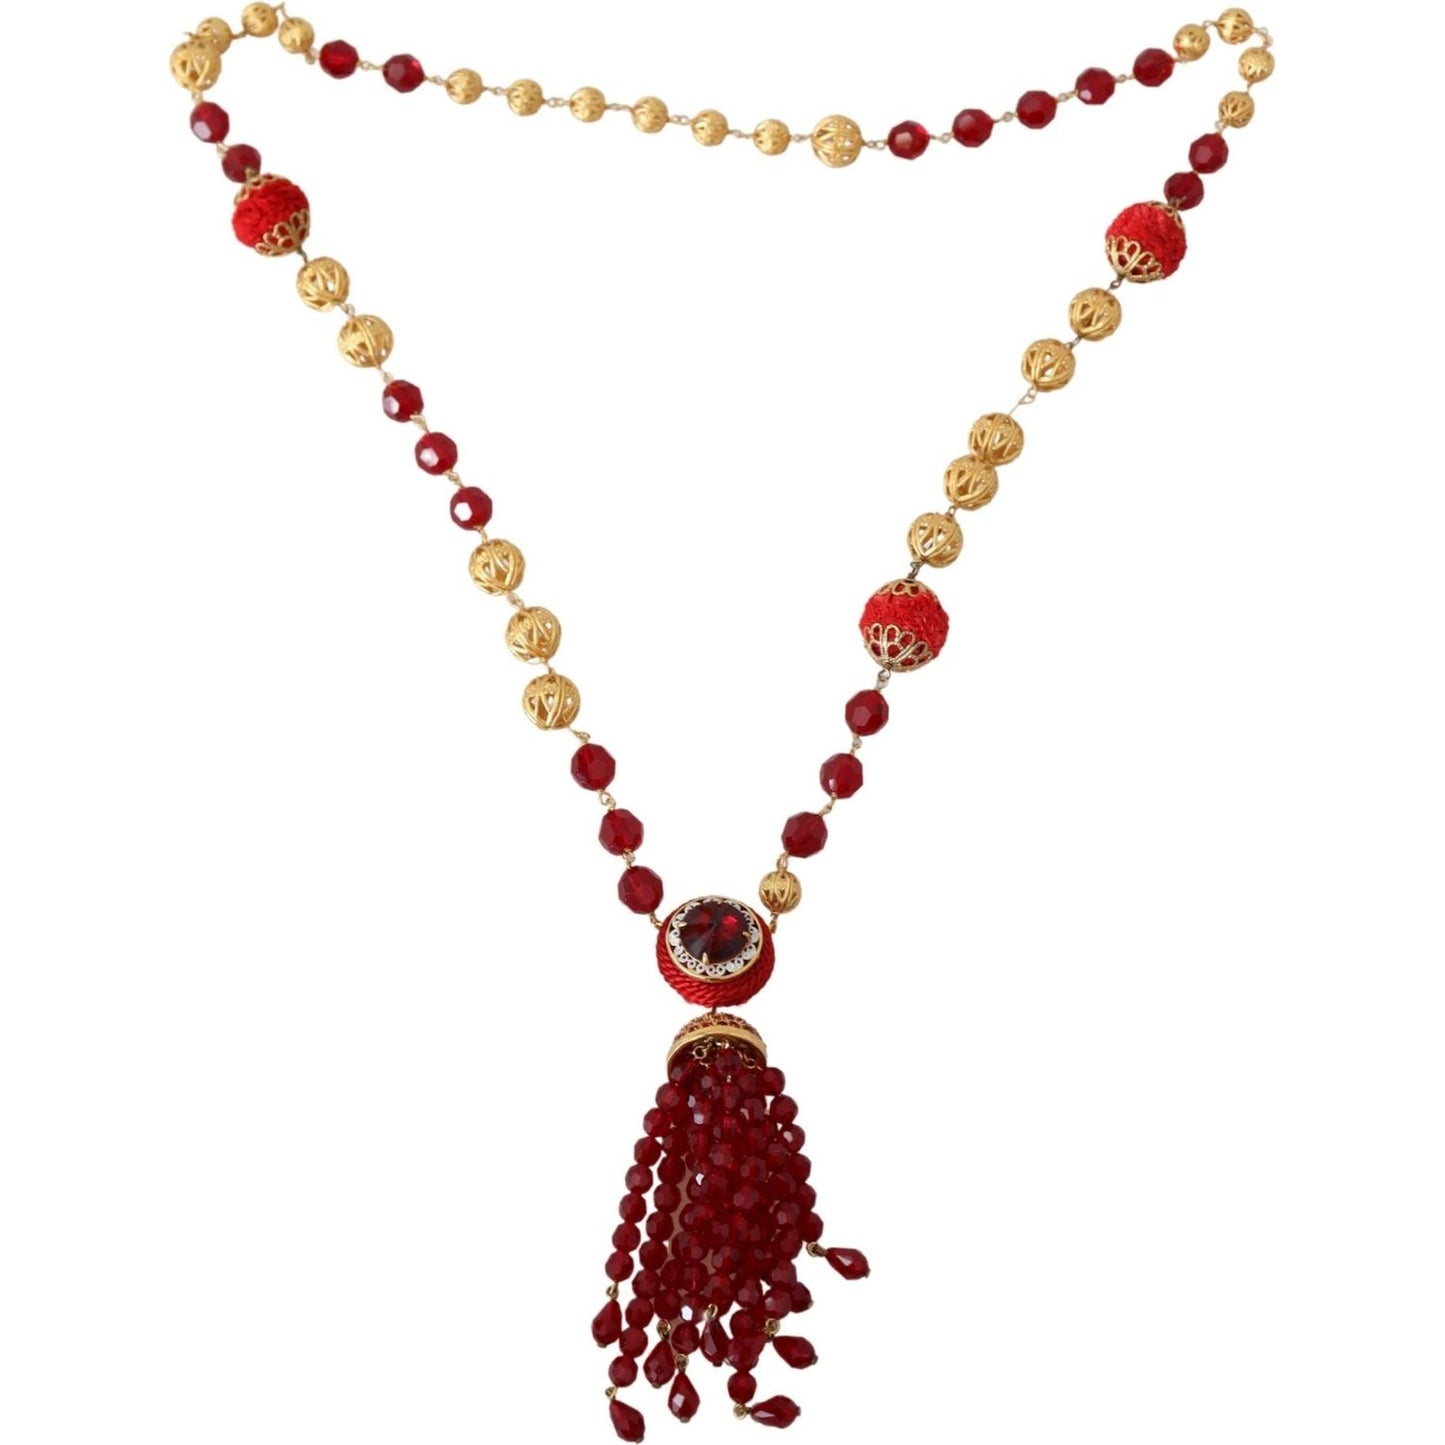 Dolce & Gabbana Elegant Red Crystal Gold-Plated Necklace Necklace gold-tone-brass-red-crystals-pendant-opera-chain-necklace